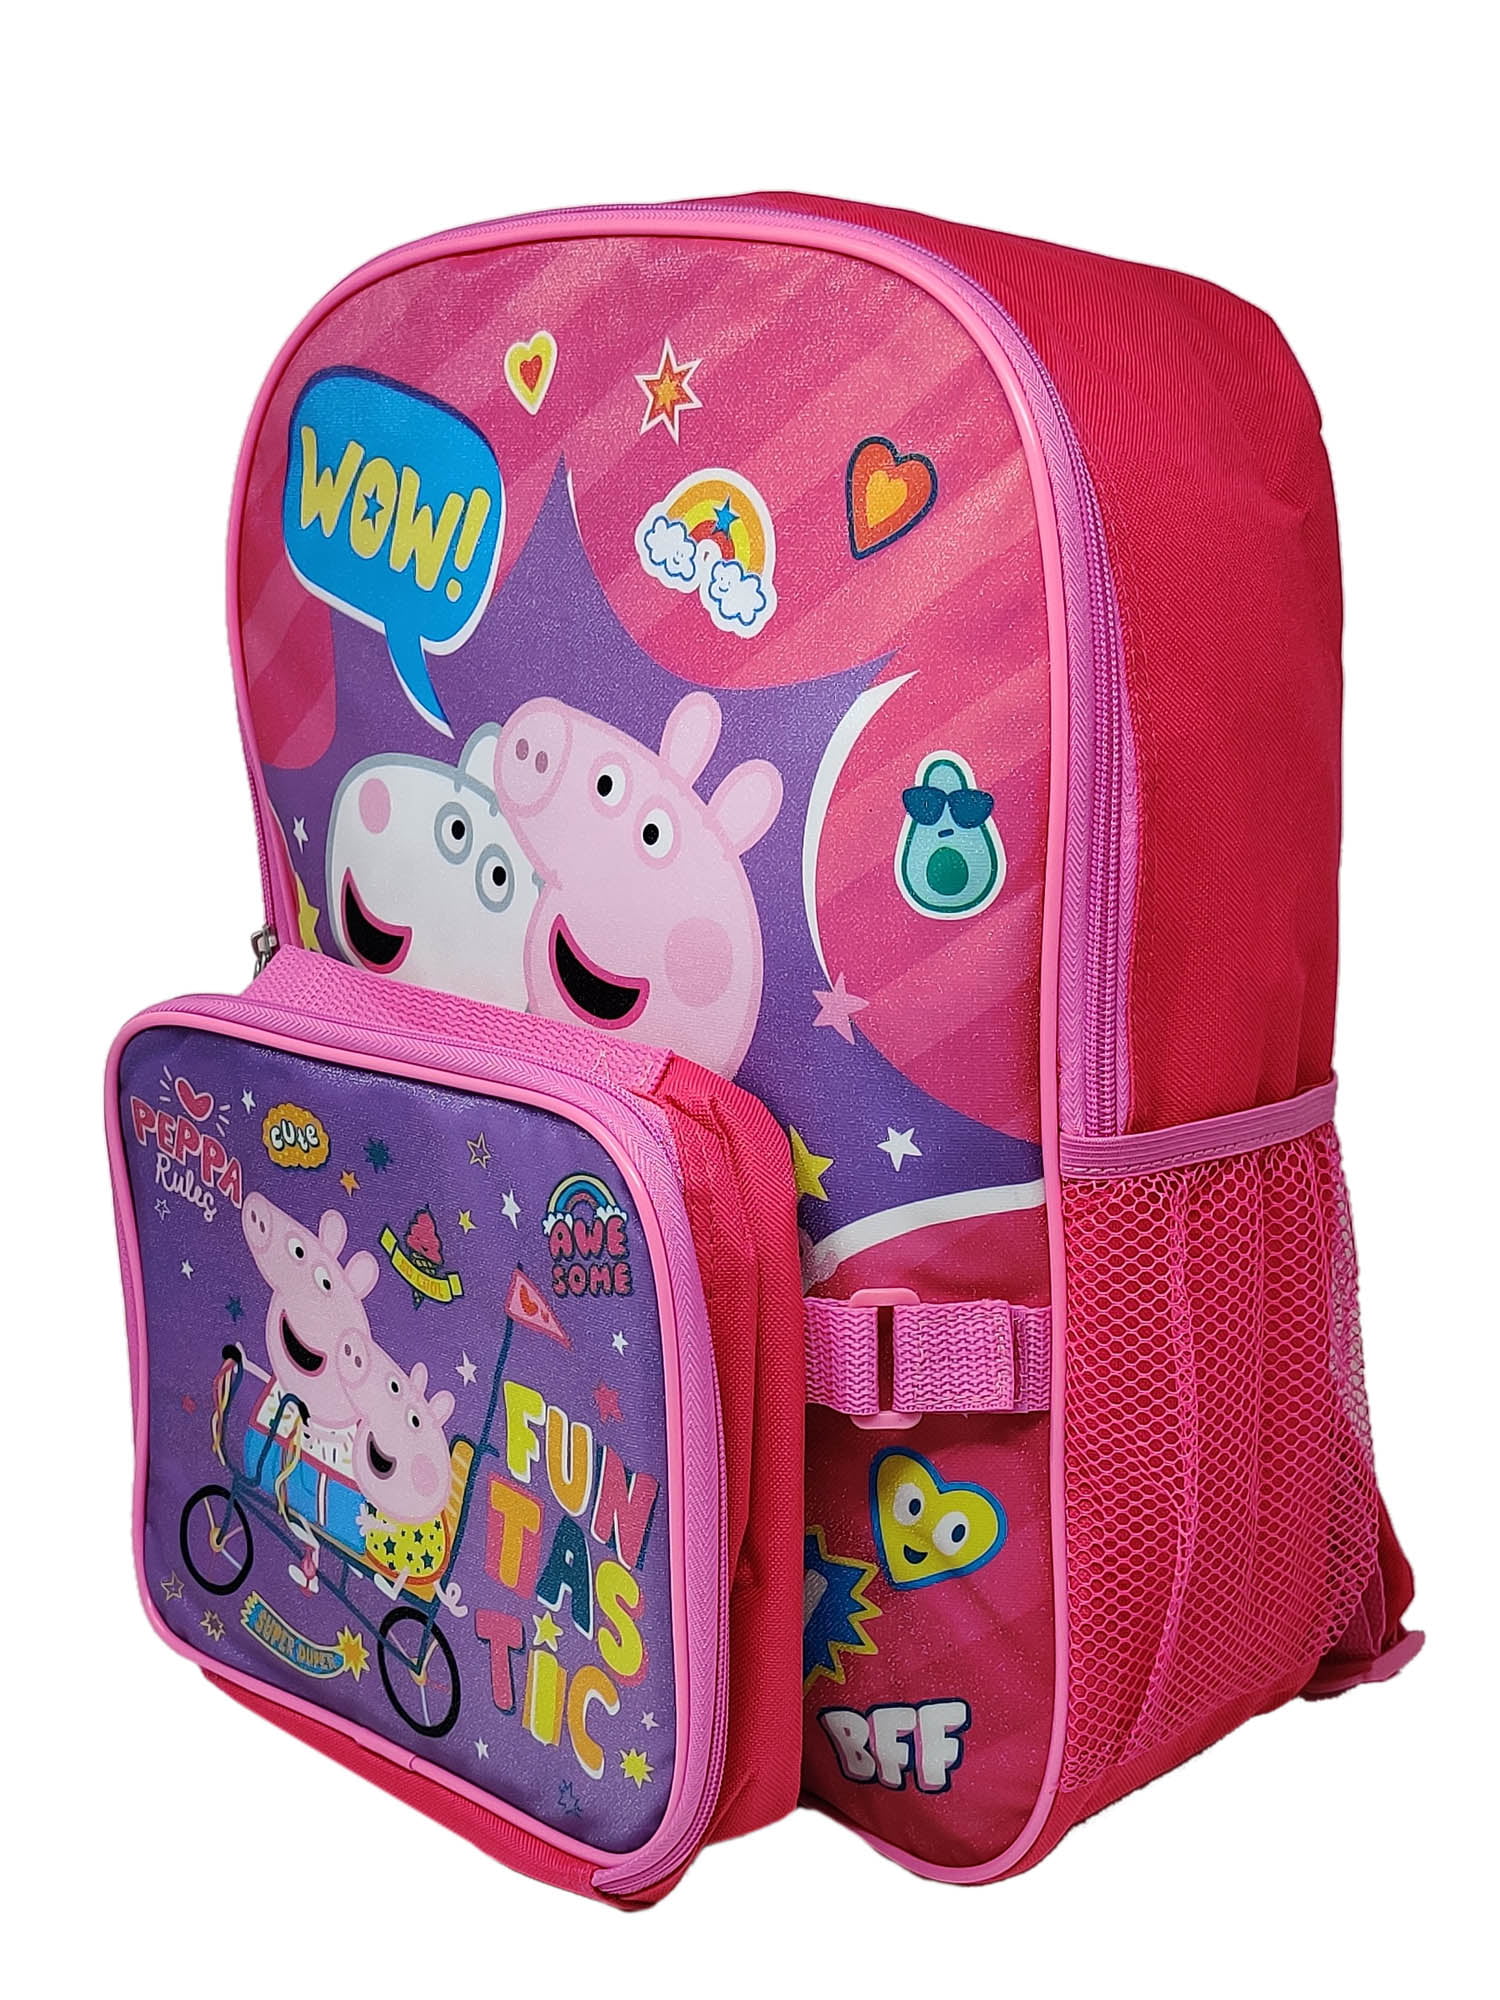 Screen Legends Peppa Pig Backpack and Lunch Box Set - Bundle with 15 Peppa Pig Backpack, Lunch Bag, Tattoos, and More | Peppa Pig Backpack for Girls